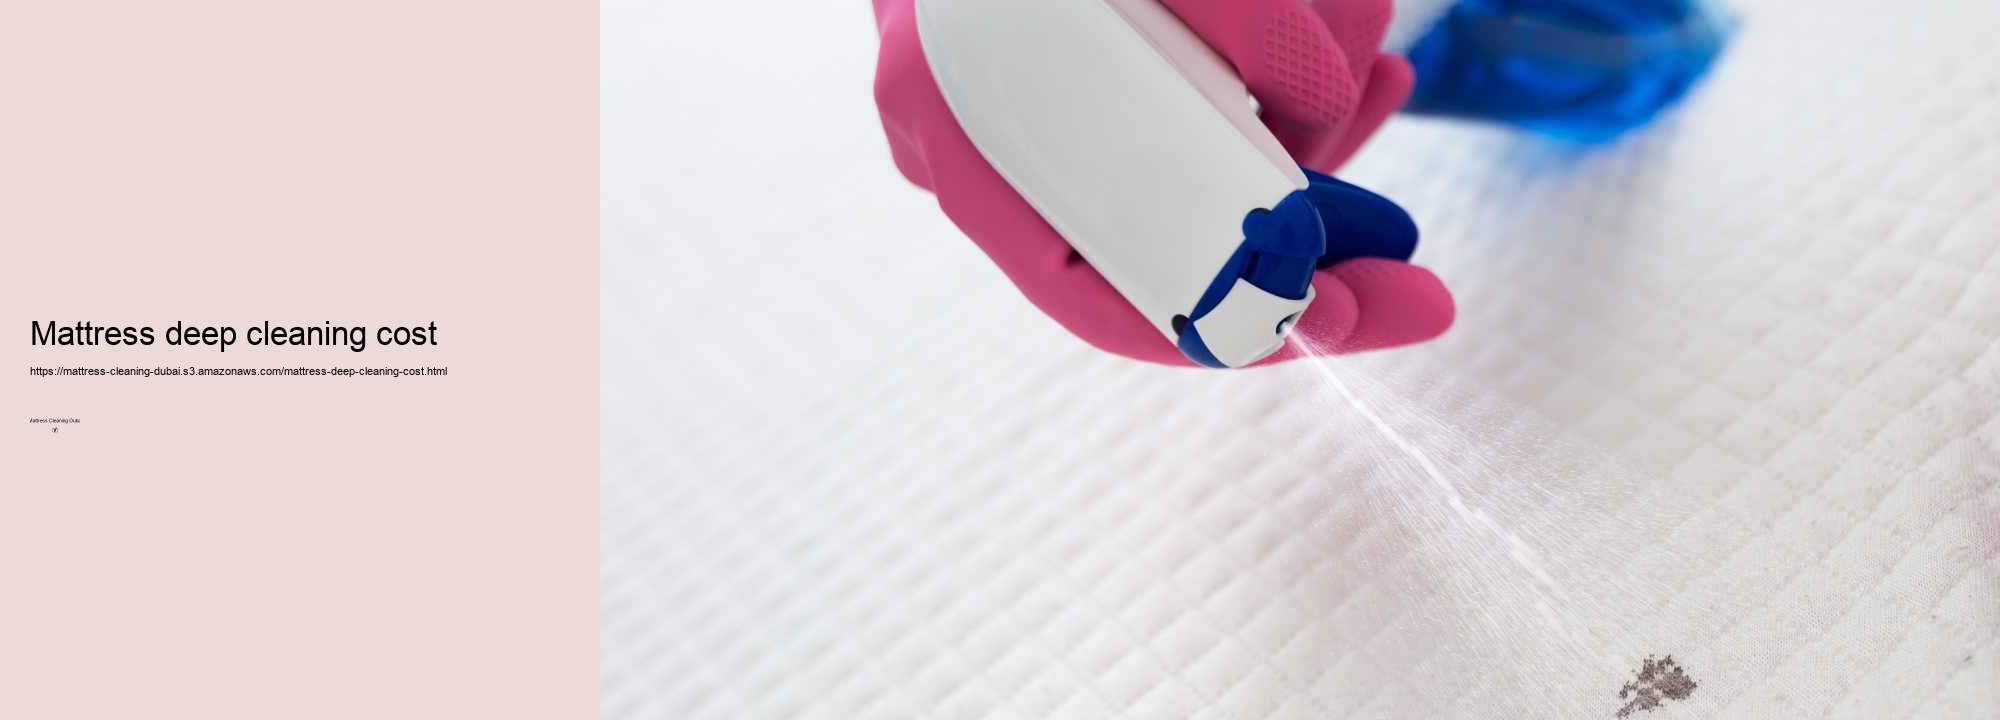 What is the Revolutionary Method for Mattress Cleaning in Dubai? 